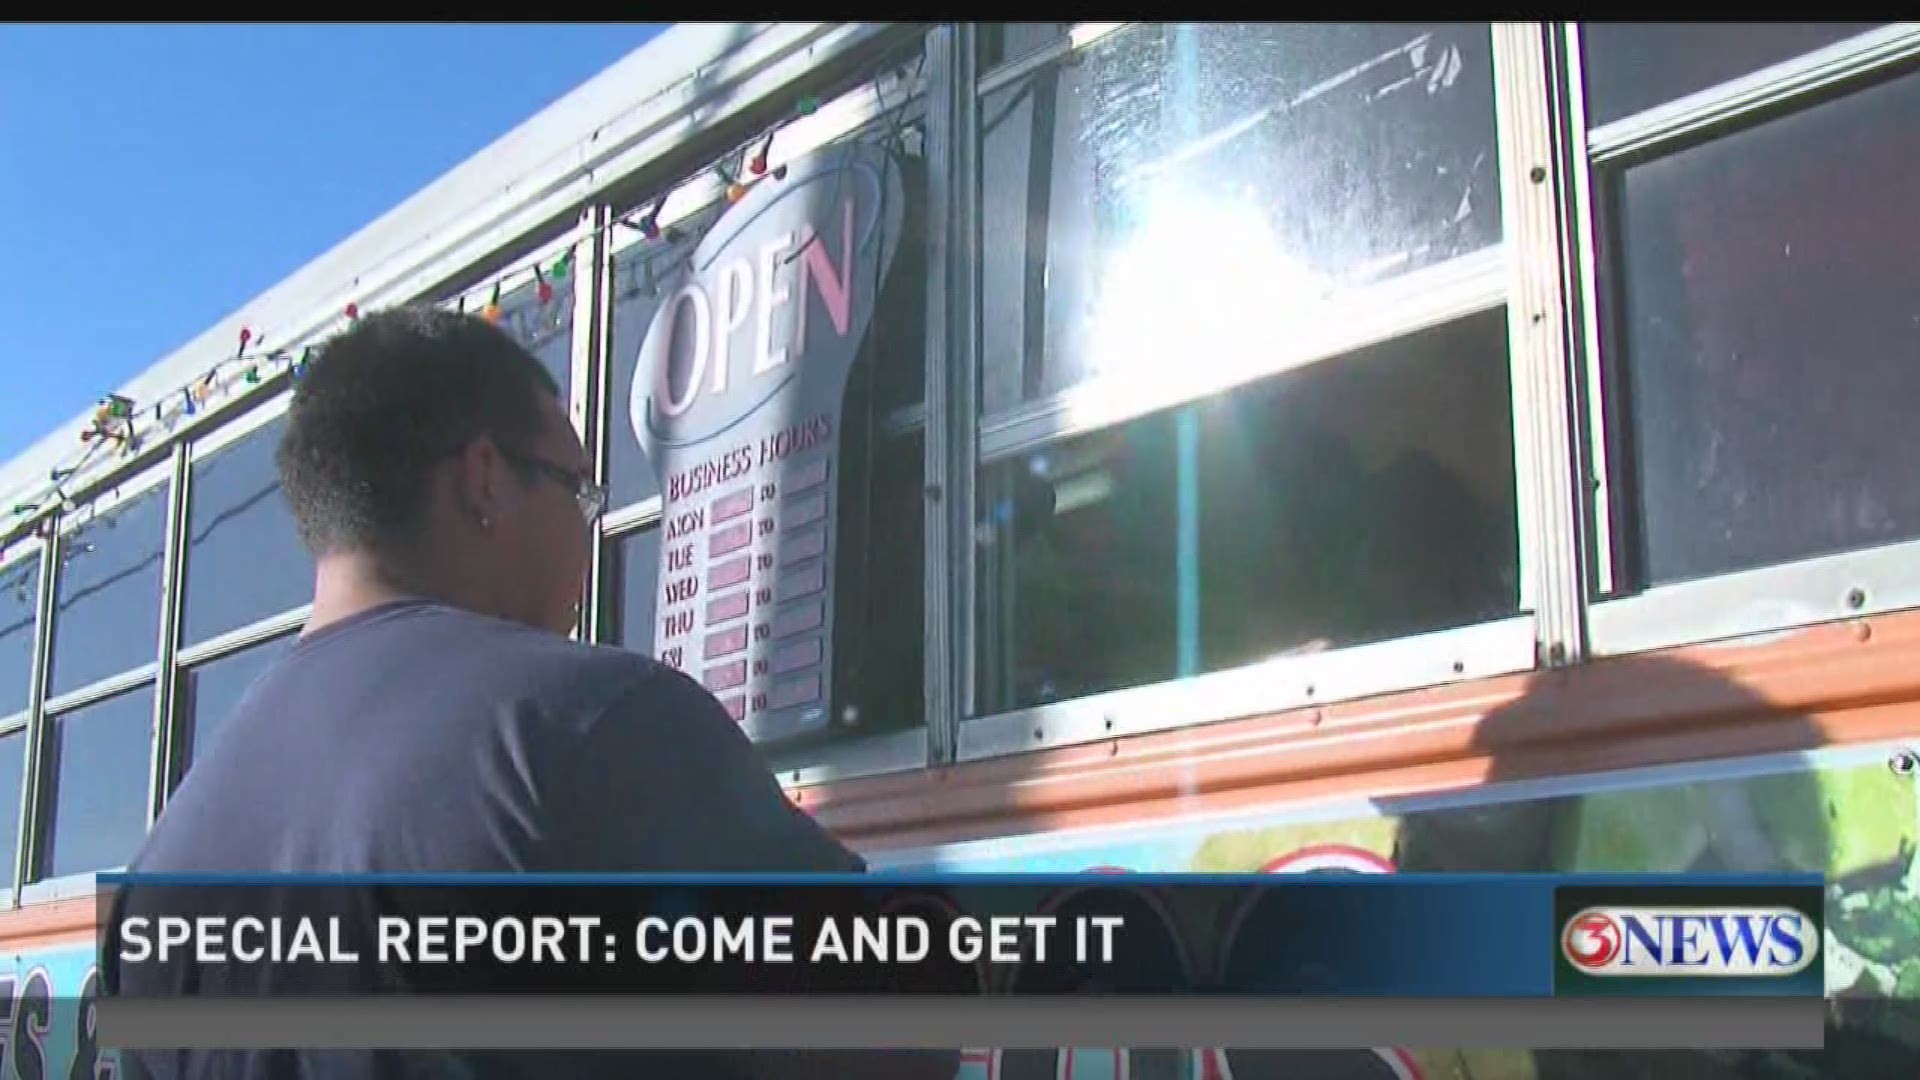 They are the current sensation in Corpus Christi -- food trucks. Just two weekends ago, thousands stopped by the first ever Summer Food Truck Fest.